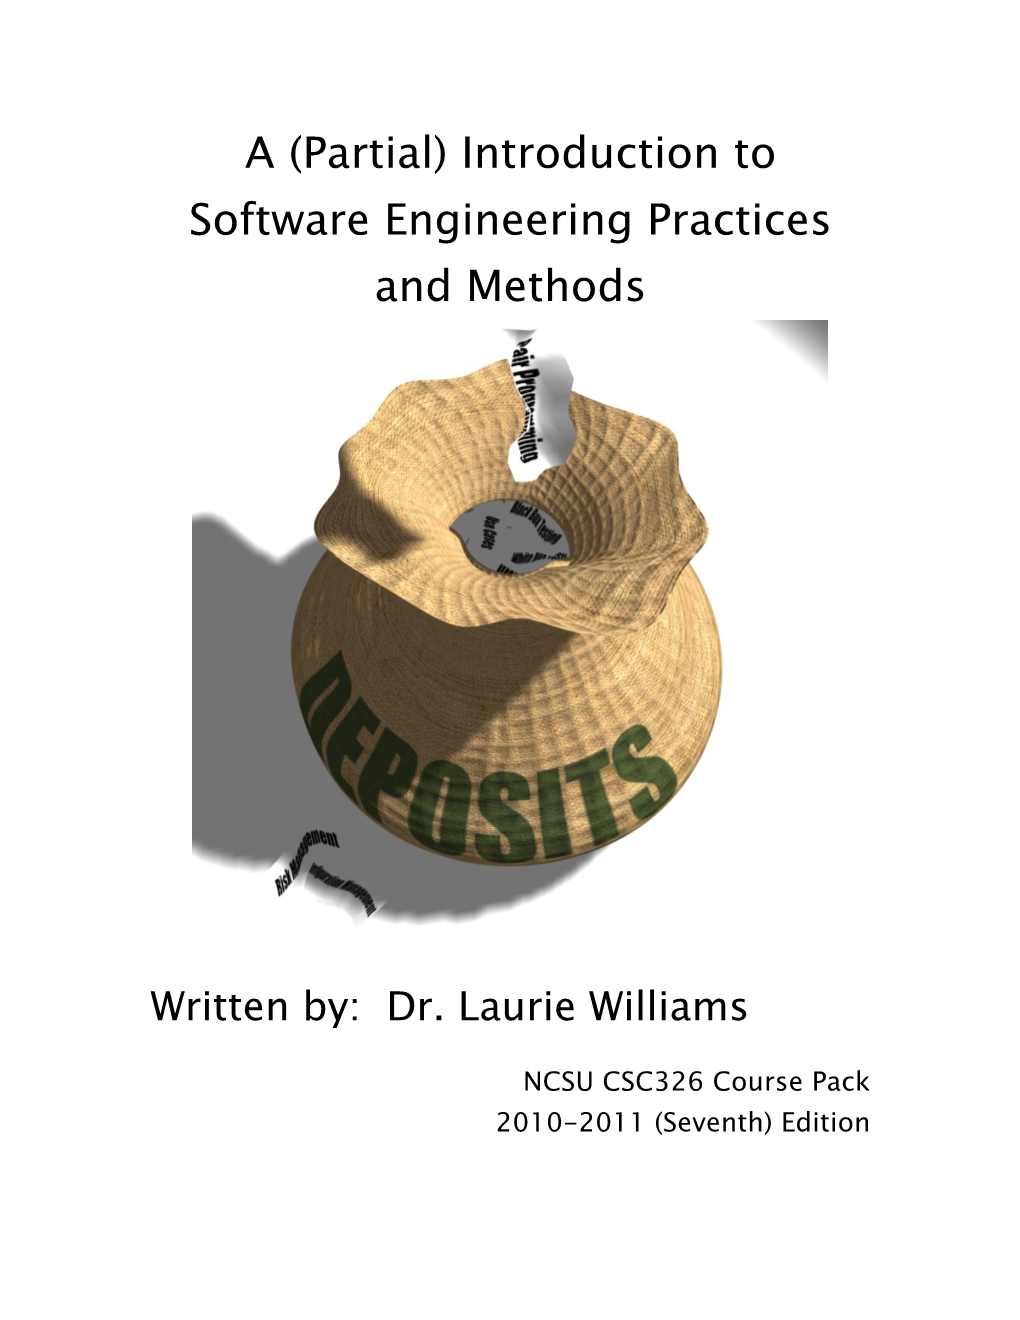 A (Partial) Introduction to Software Engineering Practices and Methods